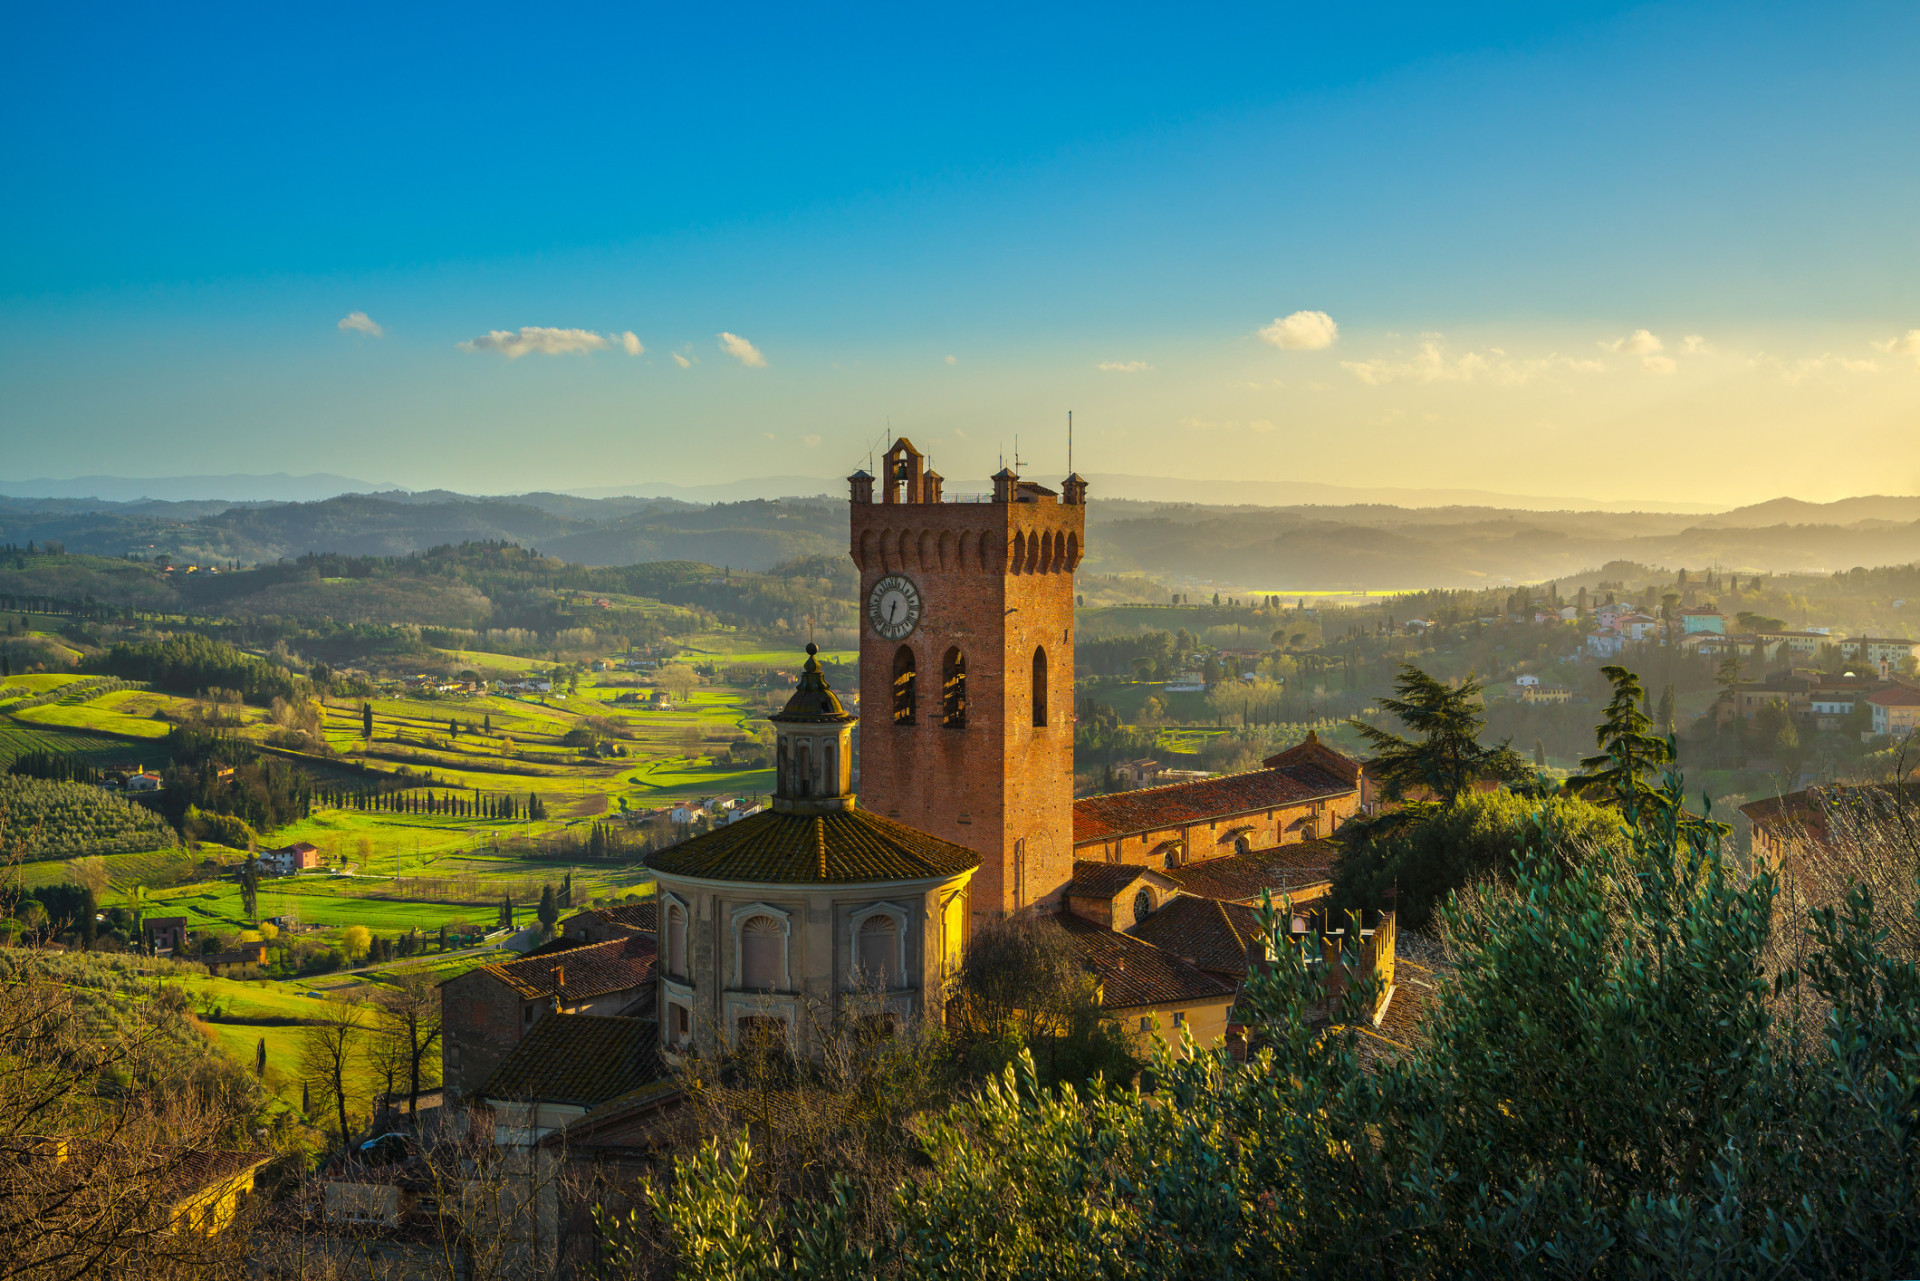 If you're looking for a solo getaway, consider walking along the Via Francigena, an ancient pilgrimage route that runs through much of Tuscany.<p>You may also like:<a href="https://www.starsinsider.com/n/266280?utm_source=msn.com&utm_medium=display&utm_campaign=referral_description&utm_content=284295v5en-in"> Controversial celebrity scandals that shocked the world</a></p>